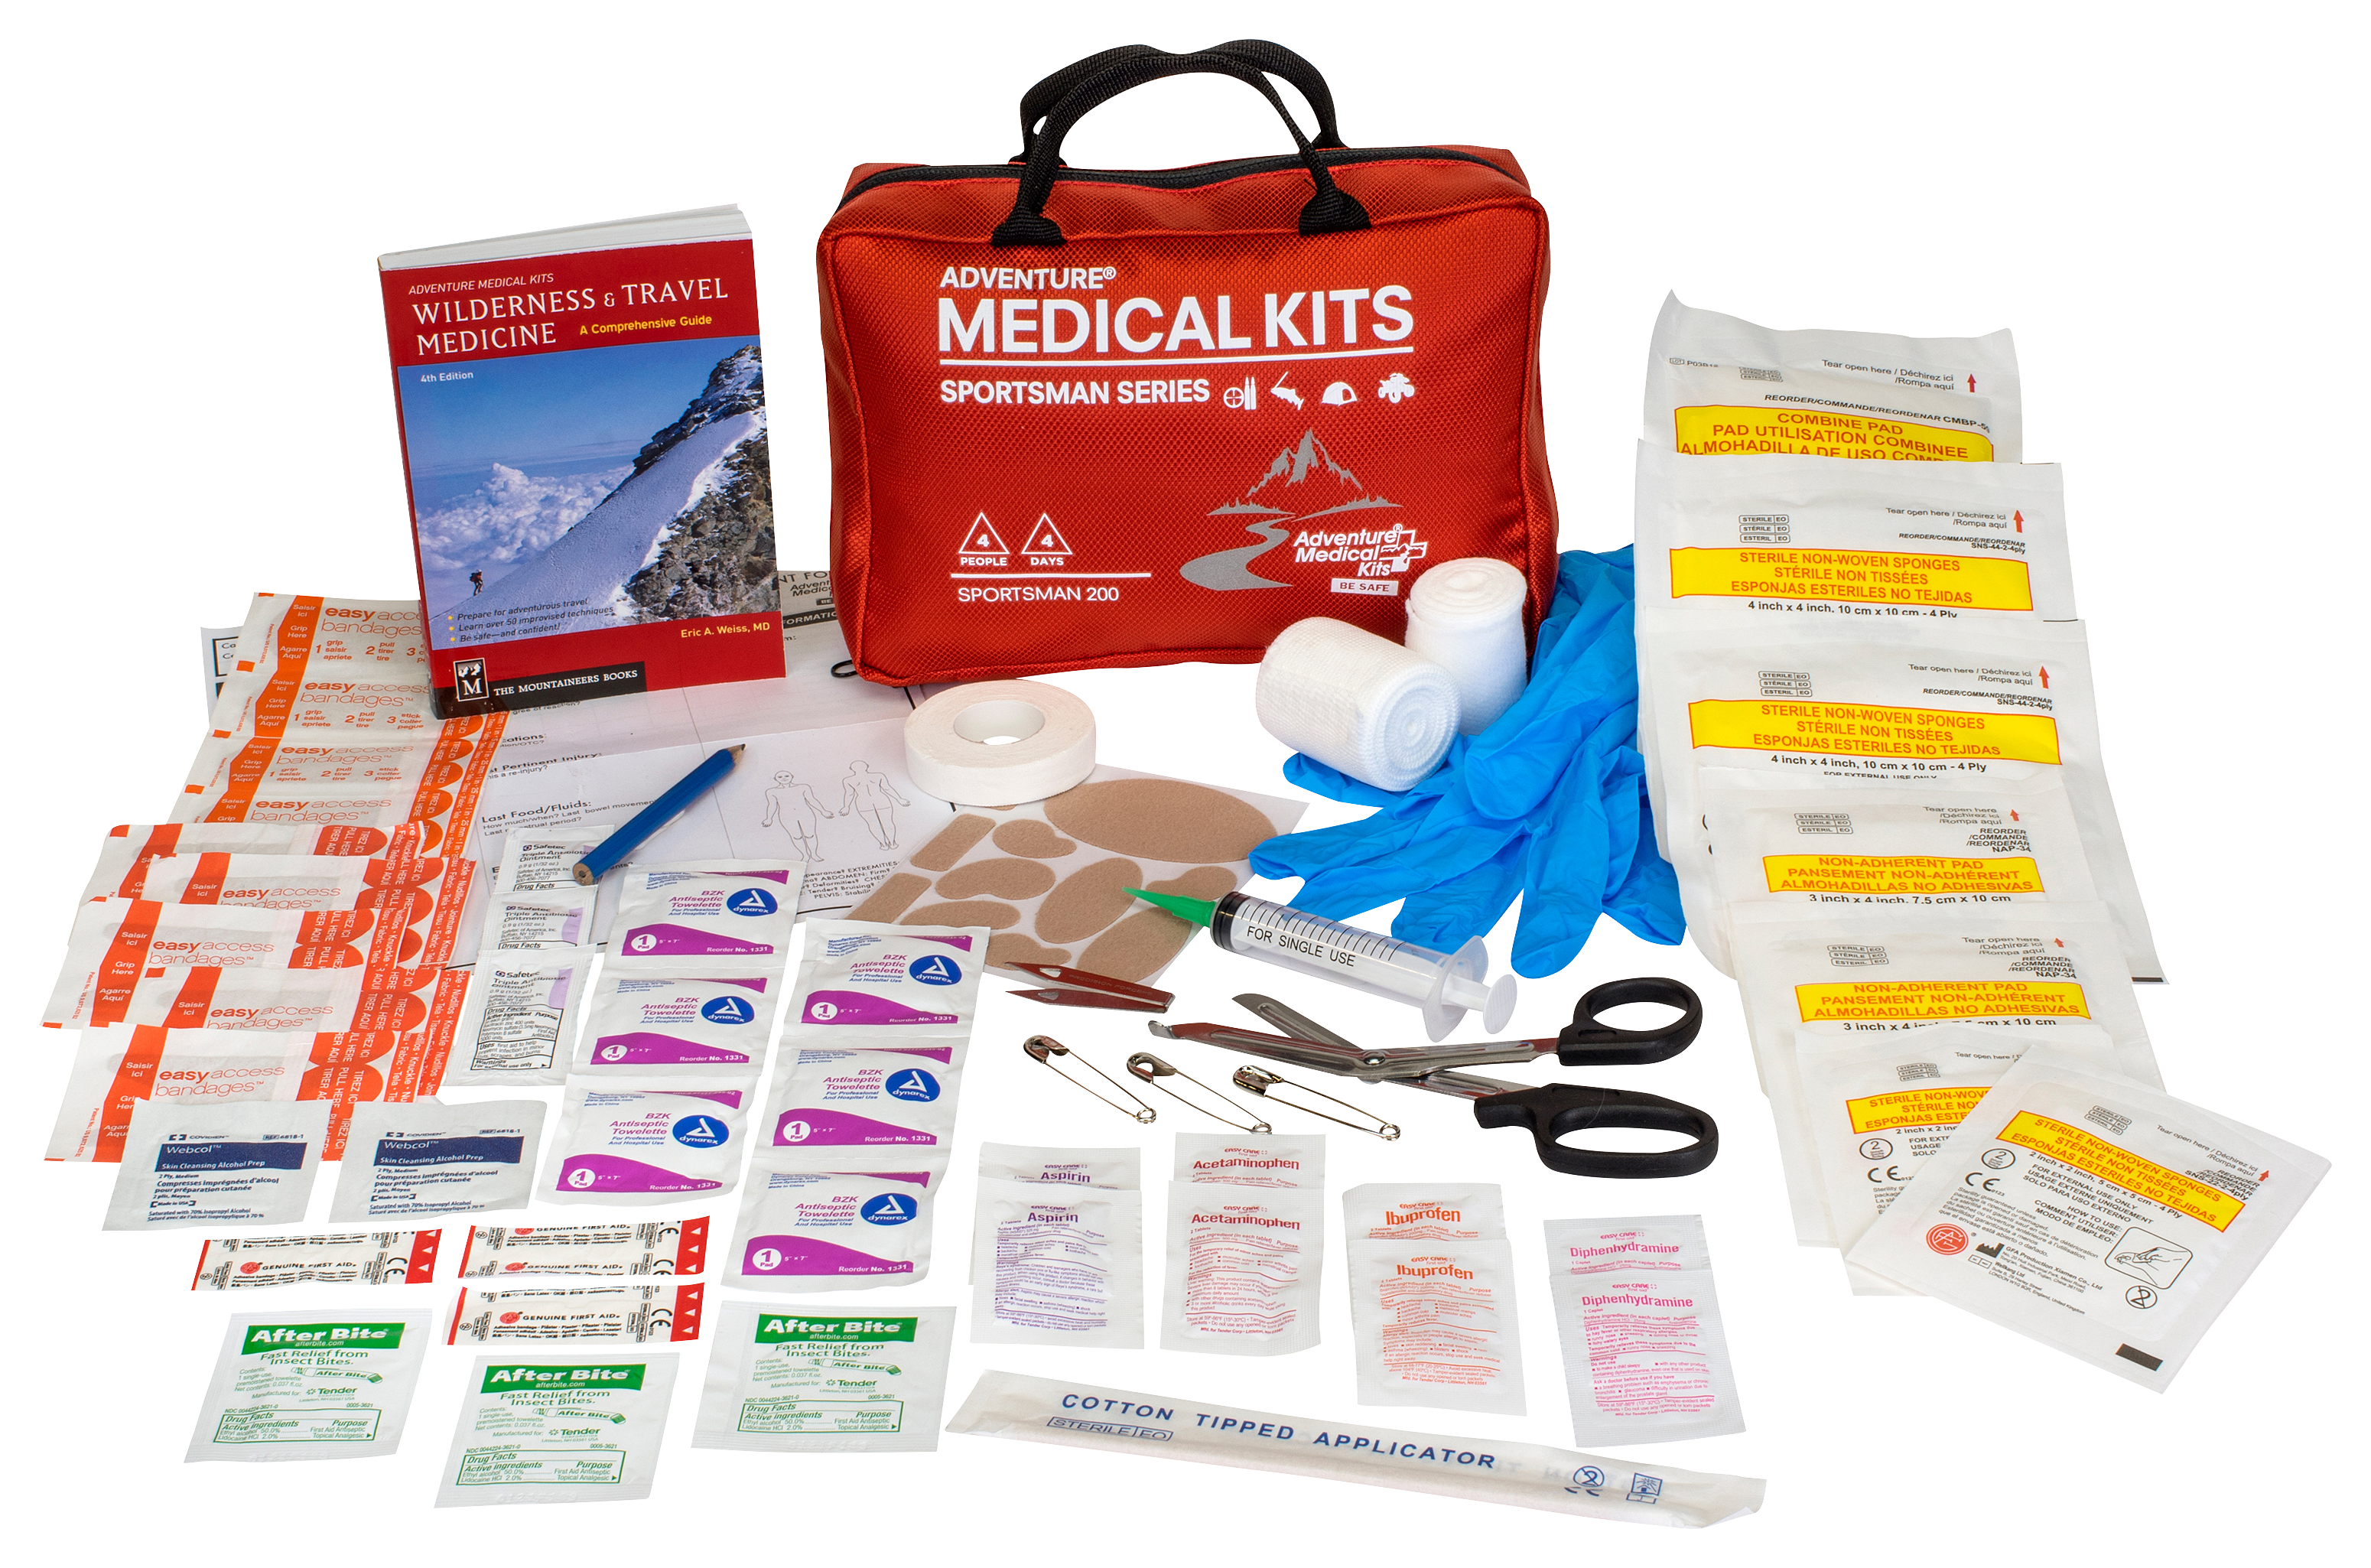 Medical Kits & First Aid Kits for Travel